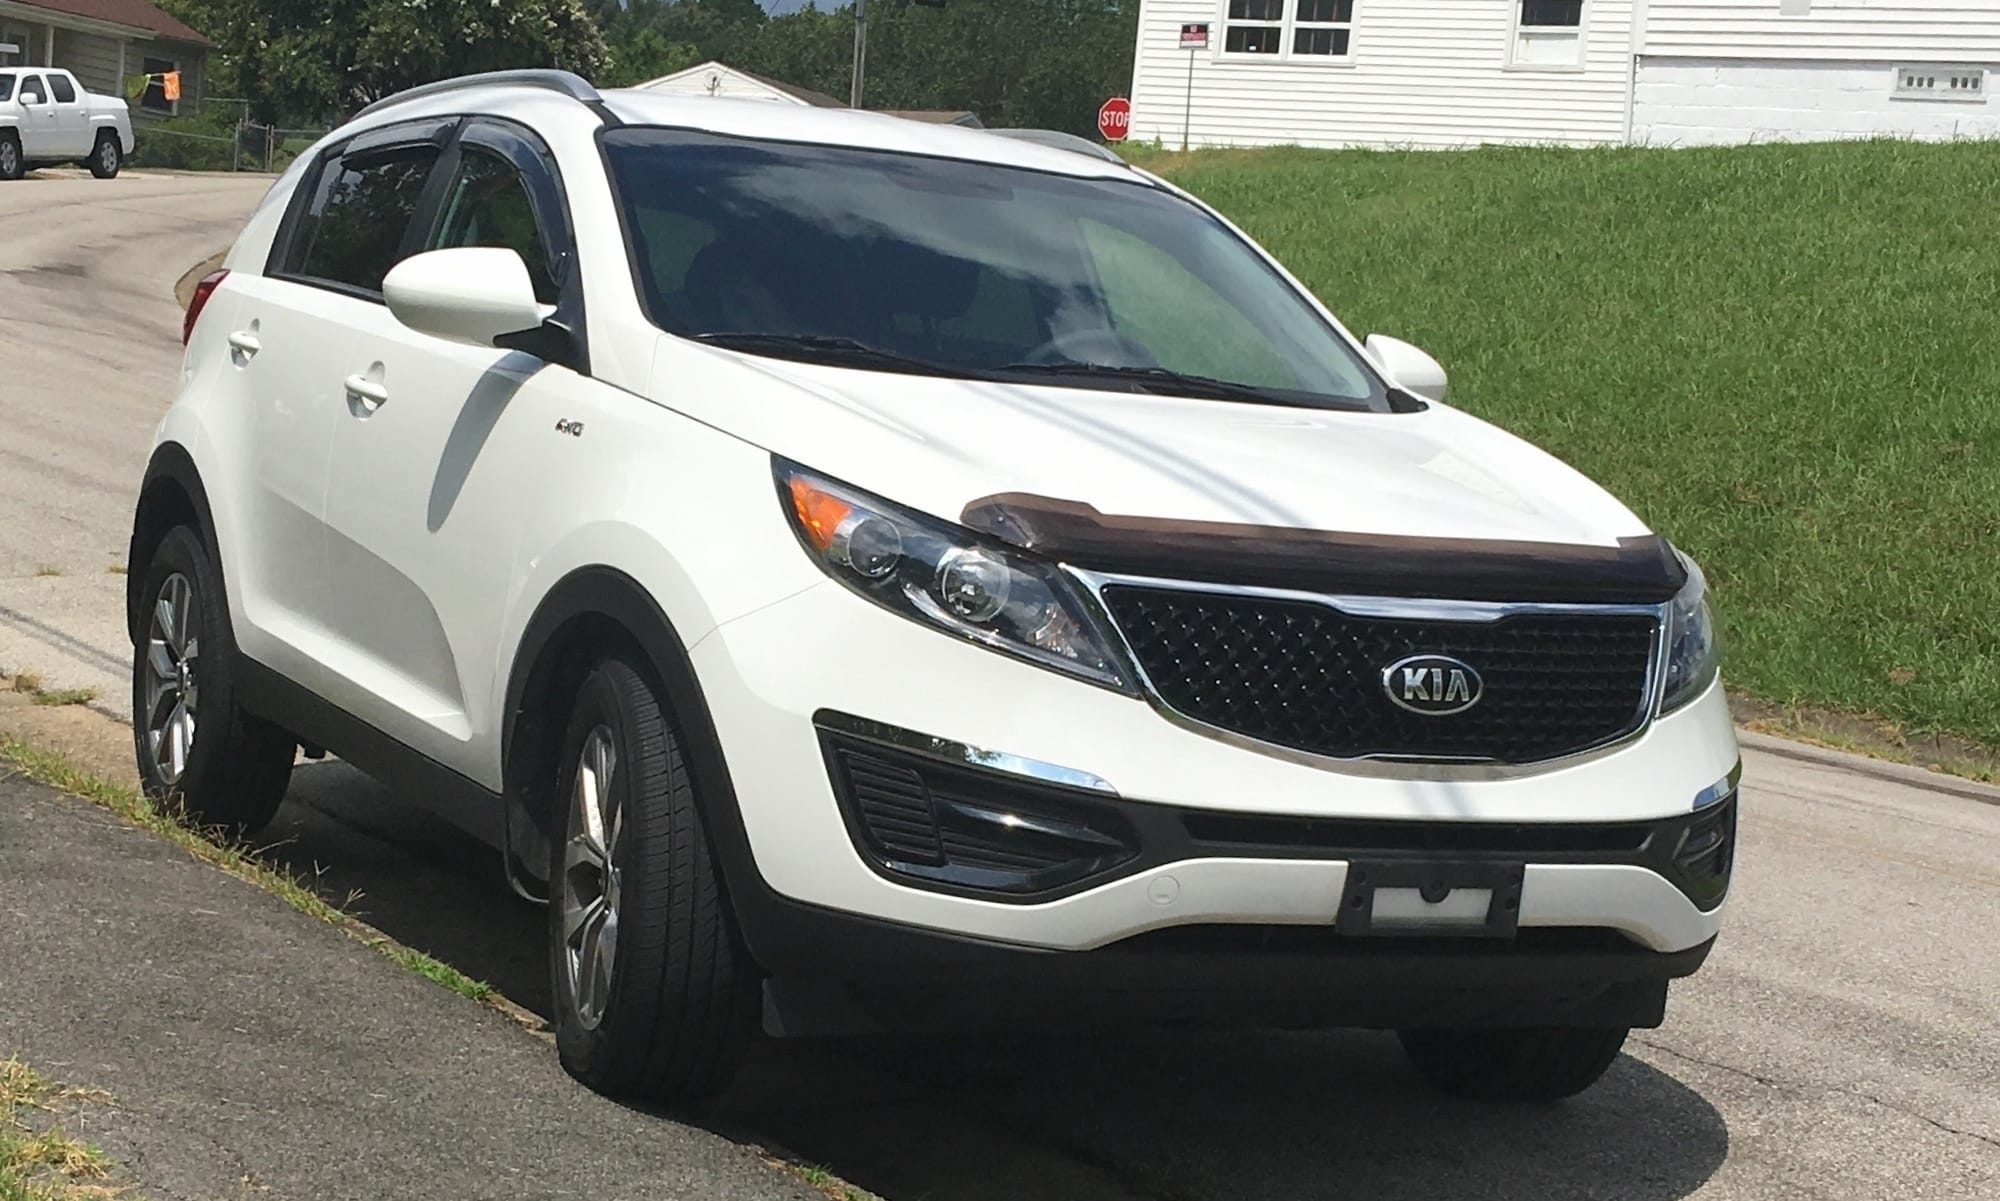 Why do I use AMSOIL? Easy, to keep my 2016 KIA Sportage on the road so I can do my photography